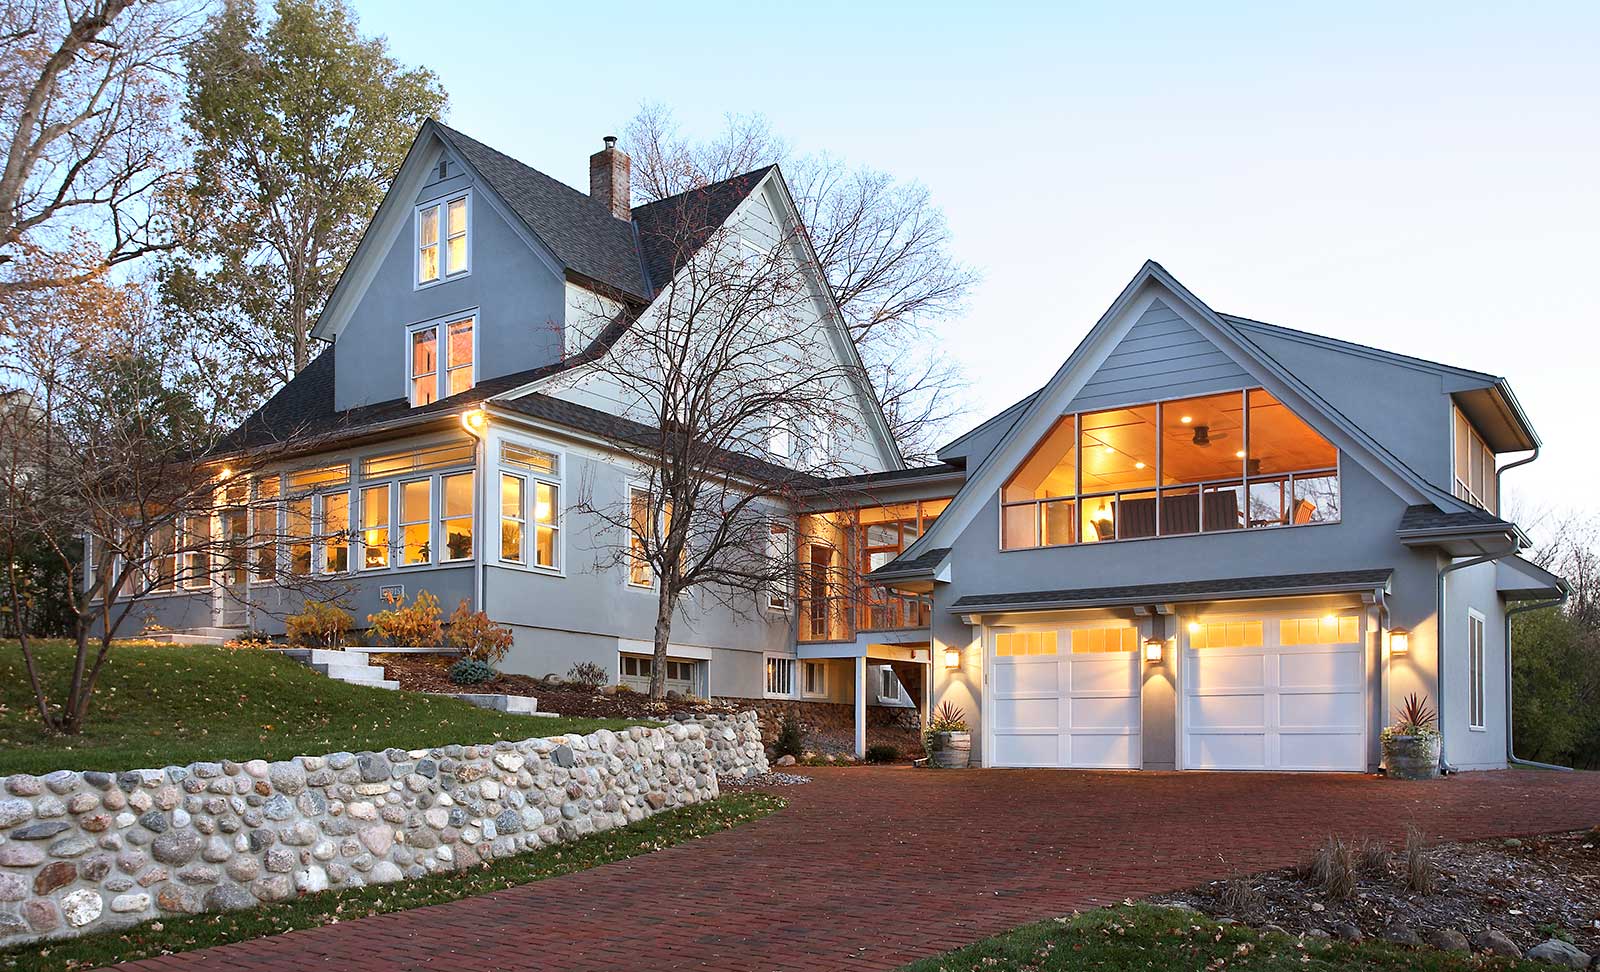 Shorewood Carriage House - Exterior | Awad Architects | Architect Designed Homes and Remodels | Minneapolis